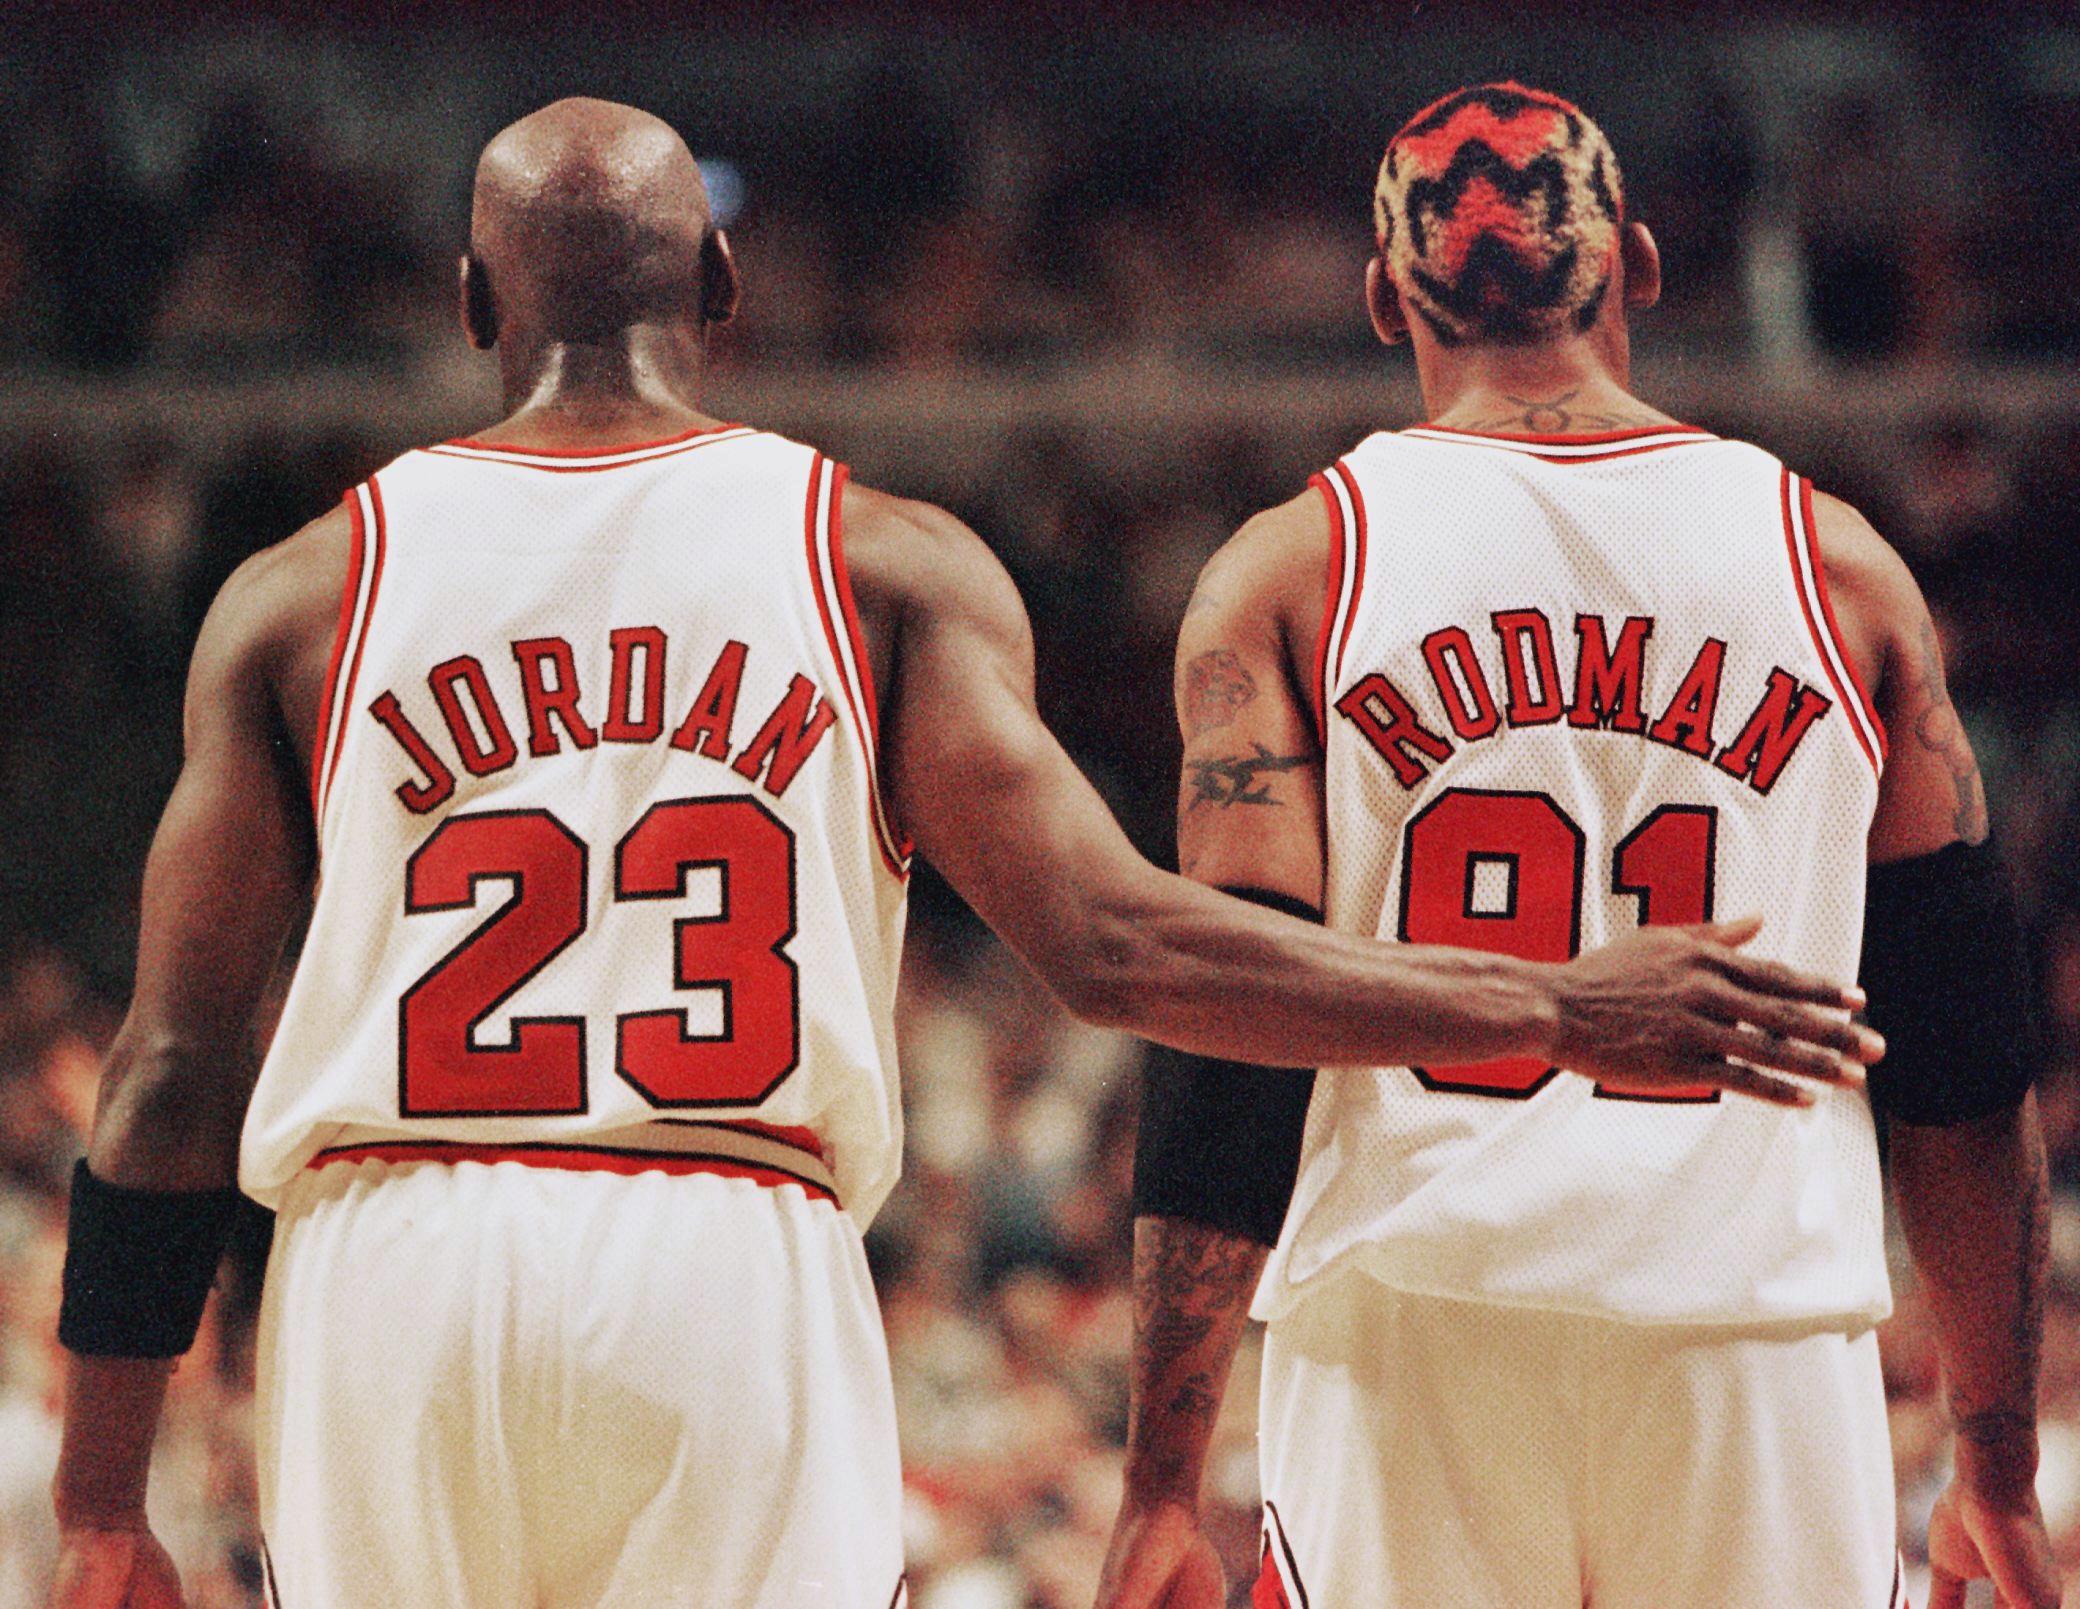 Michael Jordan (L) pats Dennis Rodman, both of the Chicago Bulls, on the back after Rodman was called for a technical foul